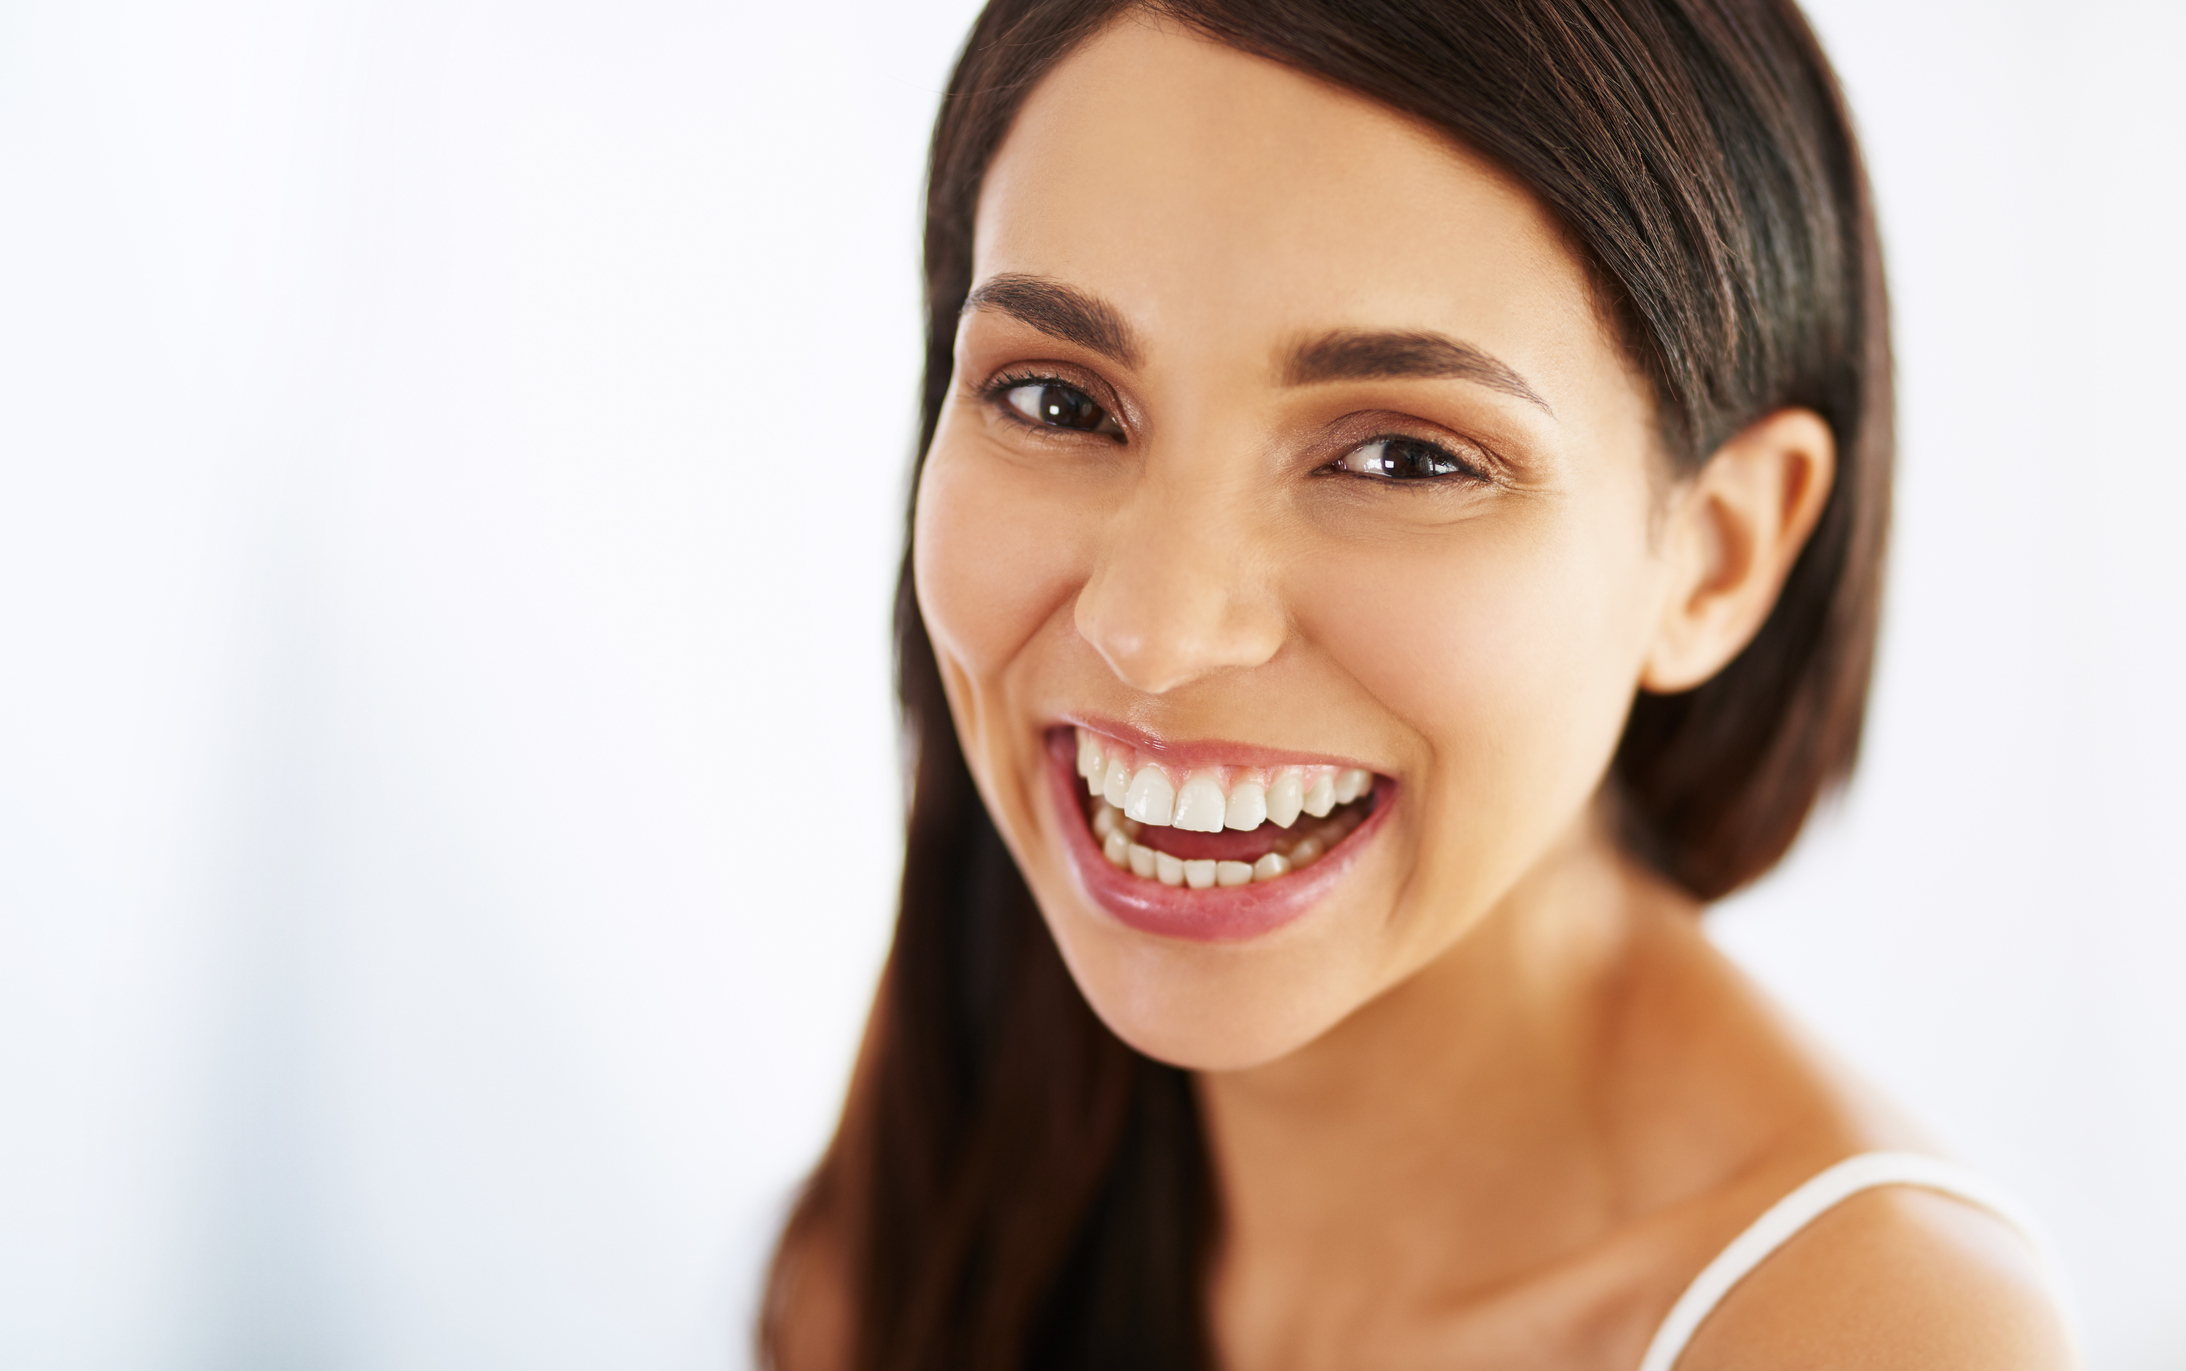 Women smiling with great skin tone and texture